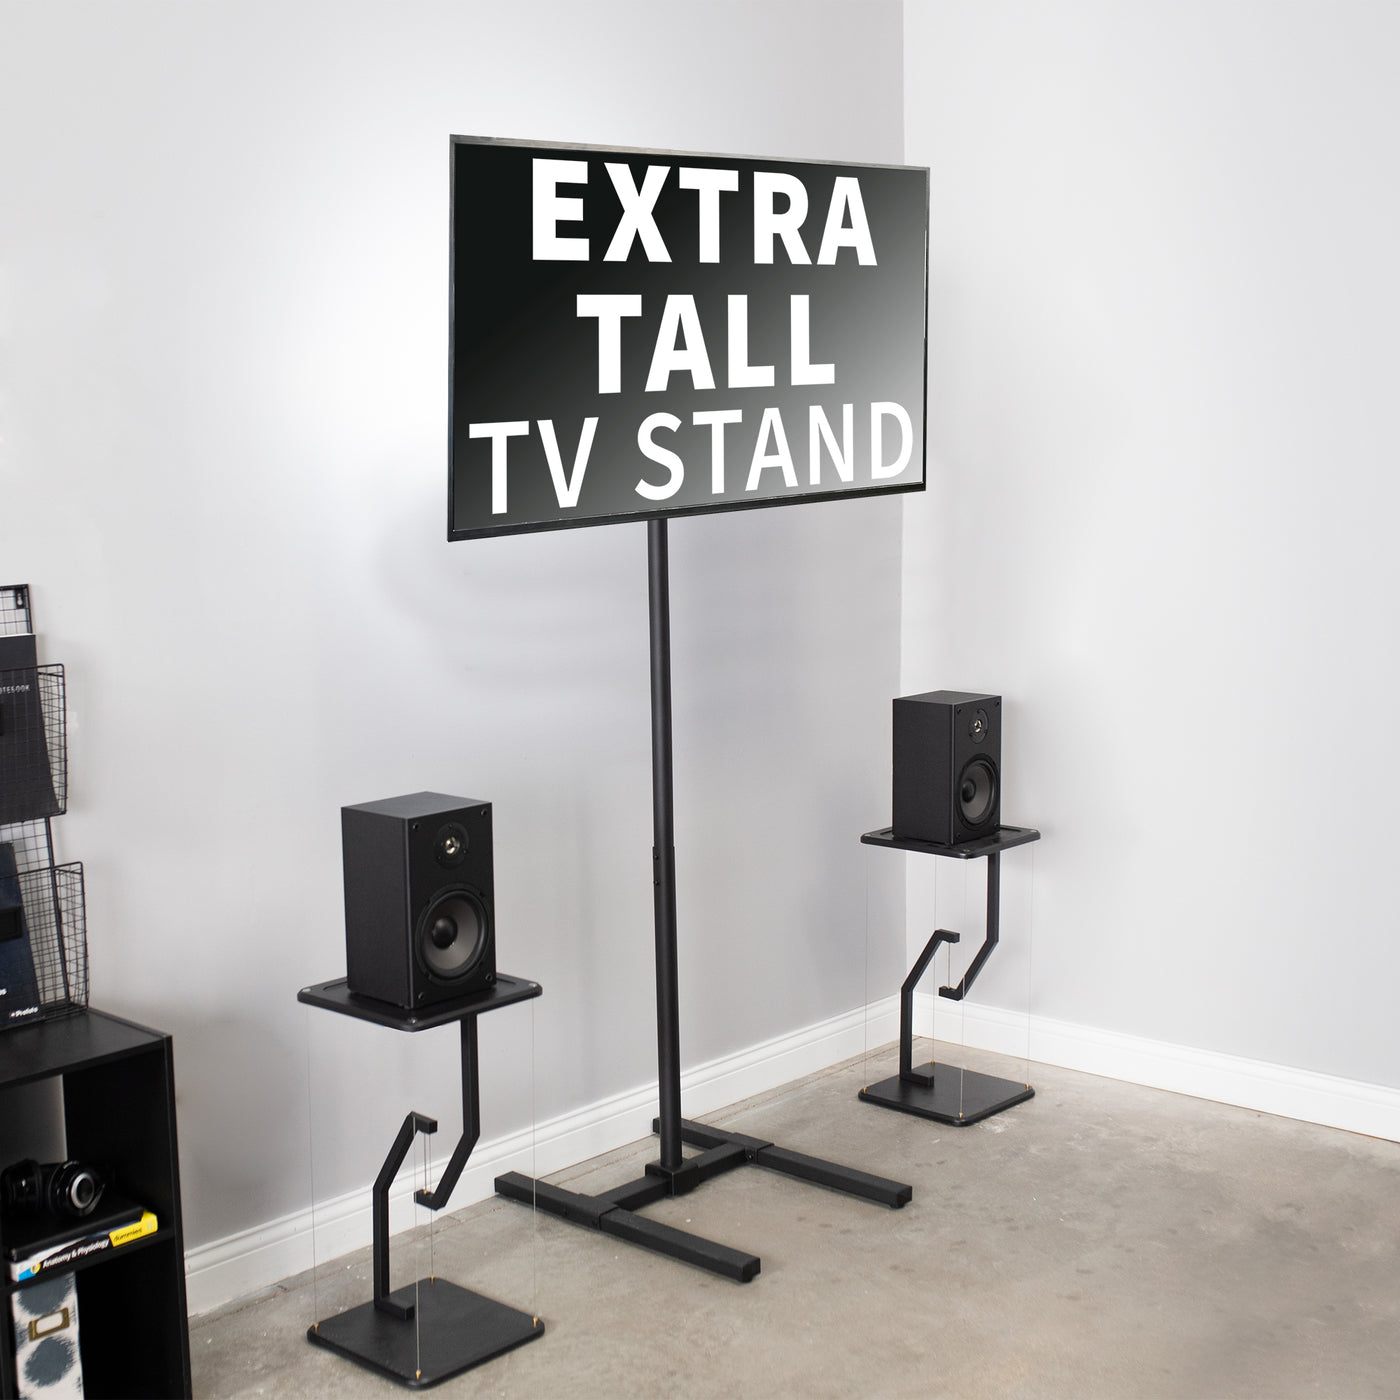 Tall TV stand from VIVO with a sturdy slim center pole.